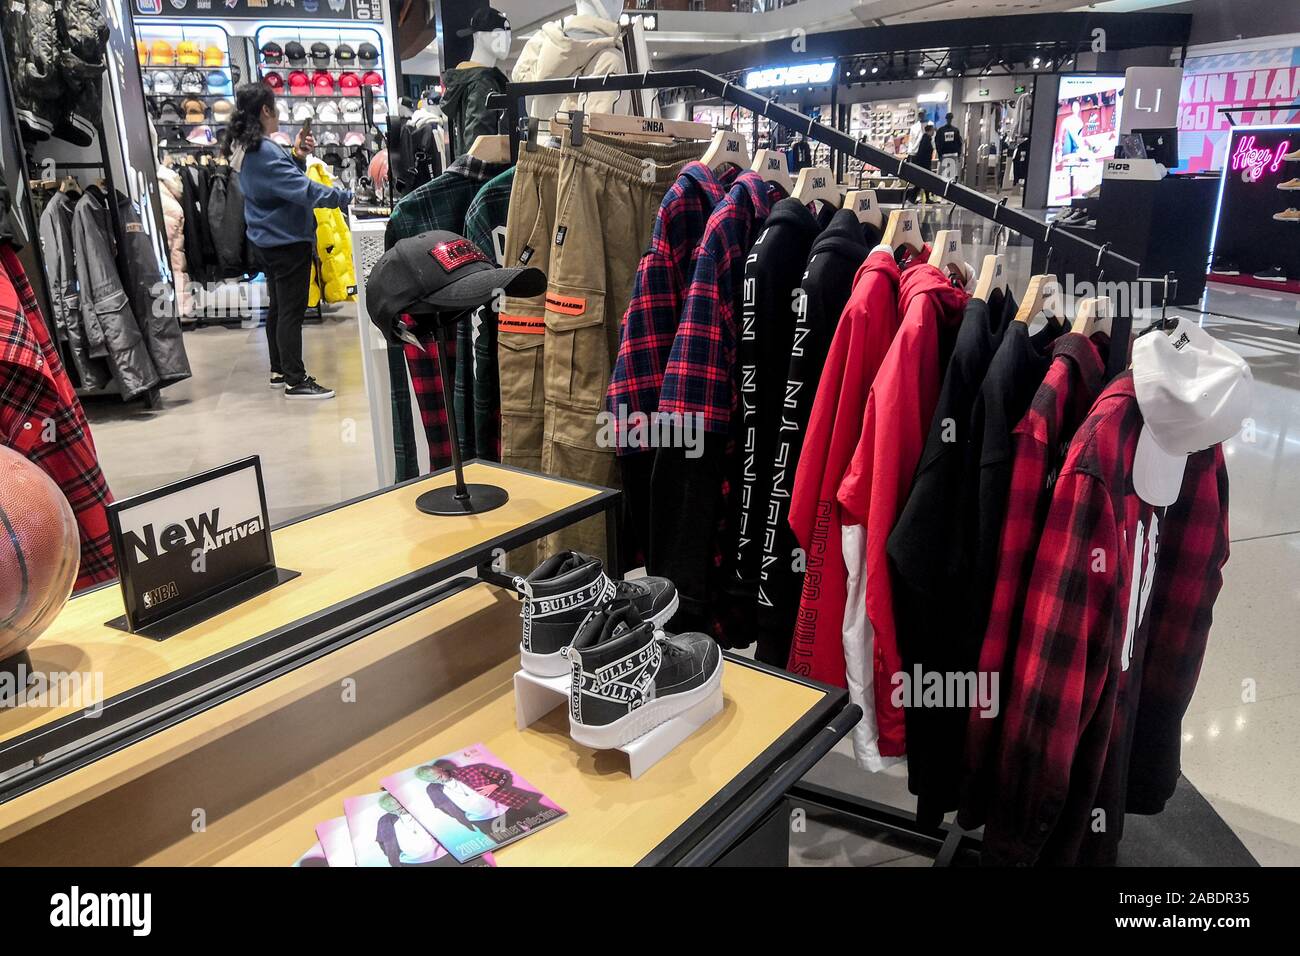 Customer Appears Nba Store Whose Employee Says Has Problem Changing – Stock  Editorial Photo © ChinaImages #314797564